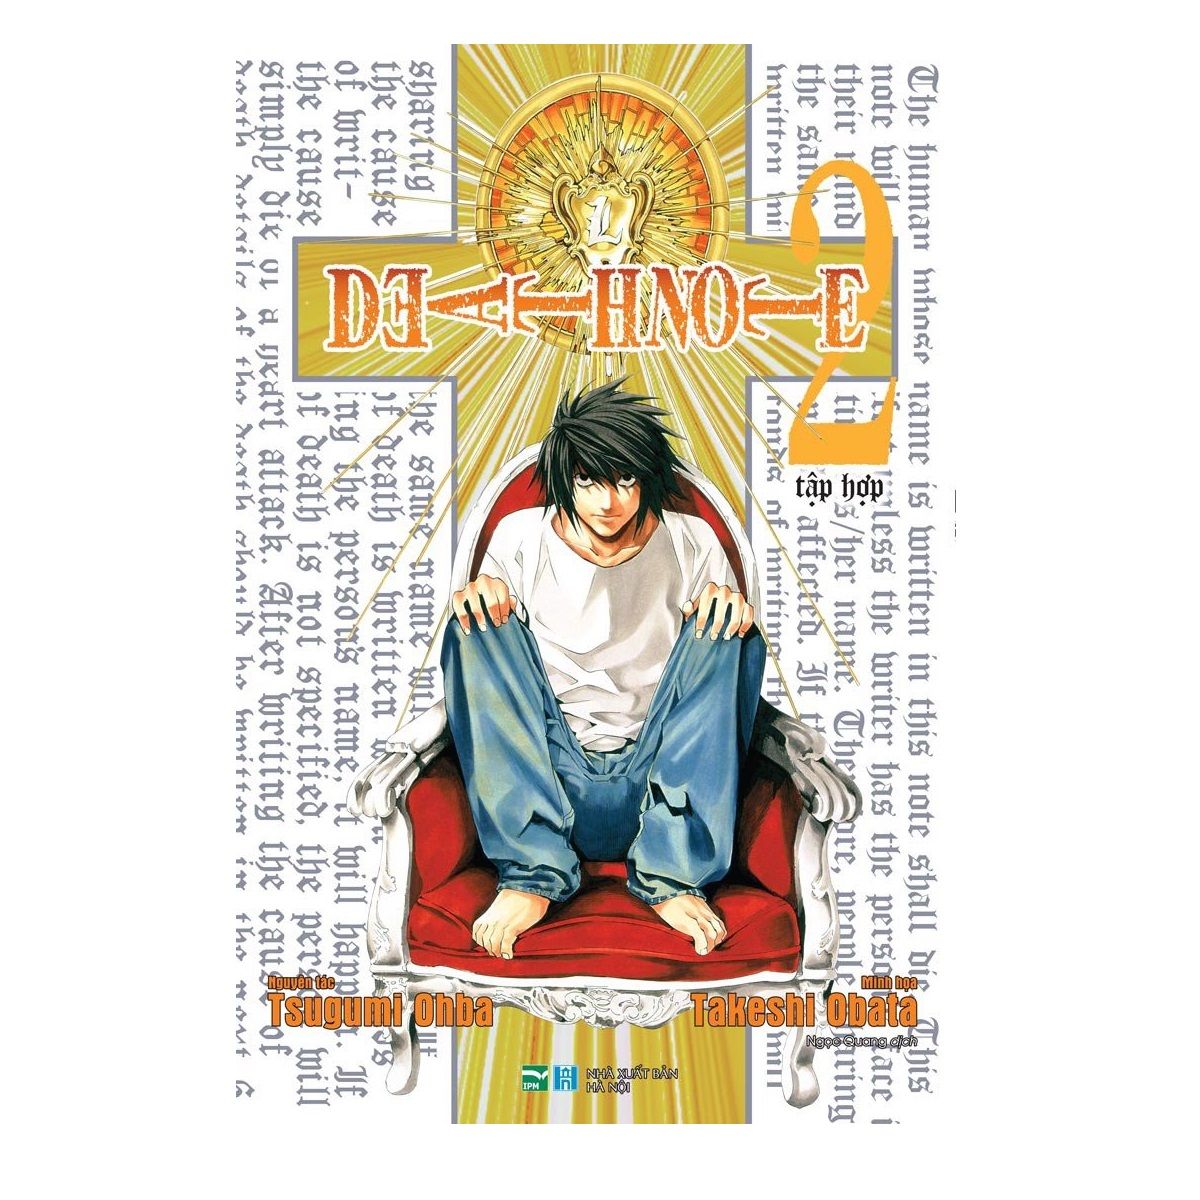  Death Note -  Tập 2 - Tập Hợp 